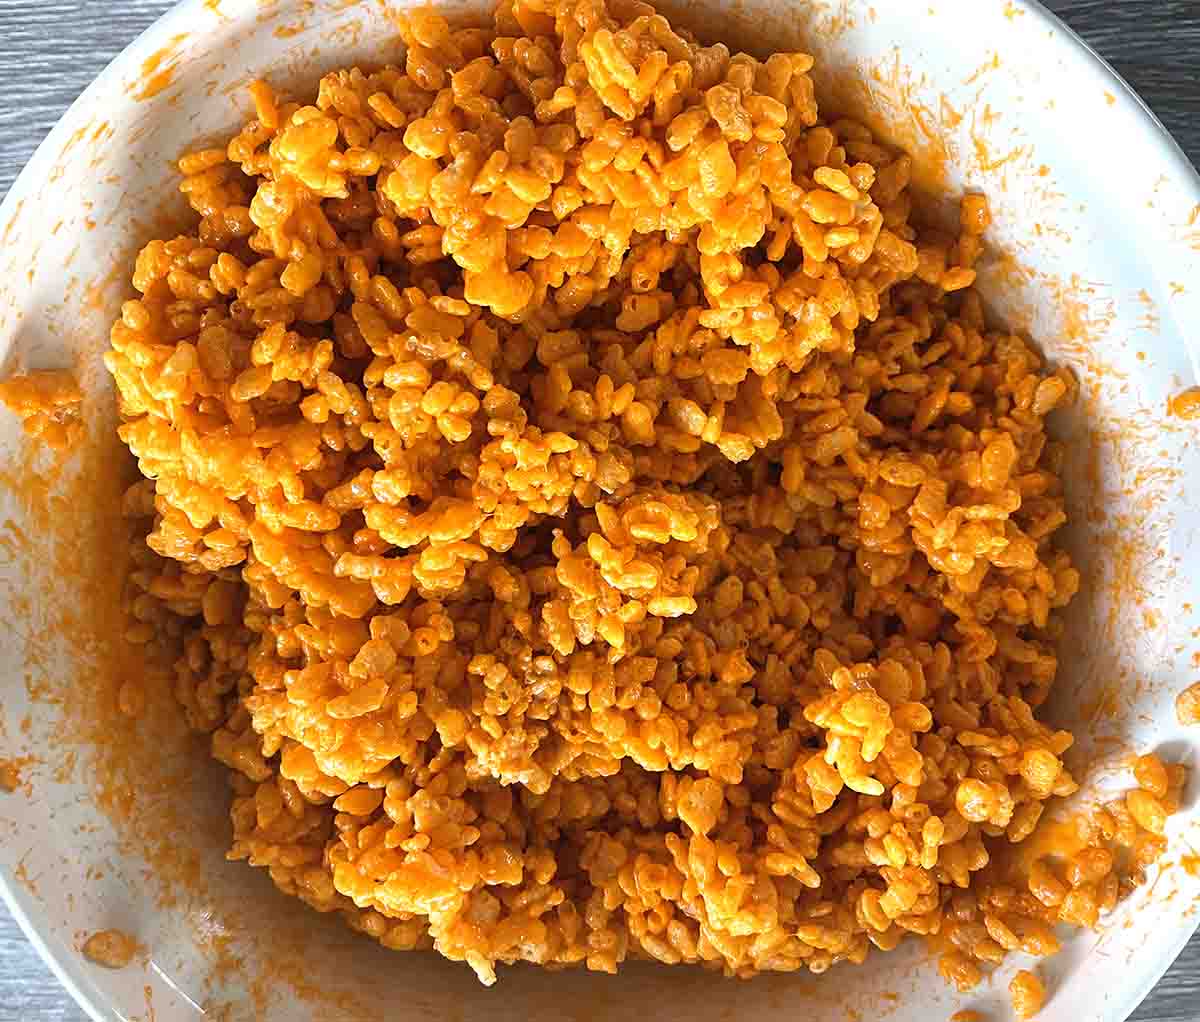 mixture combined with rice krispies.